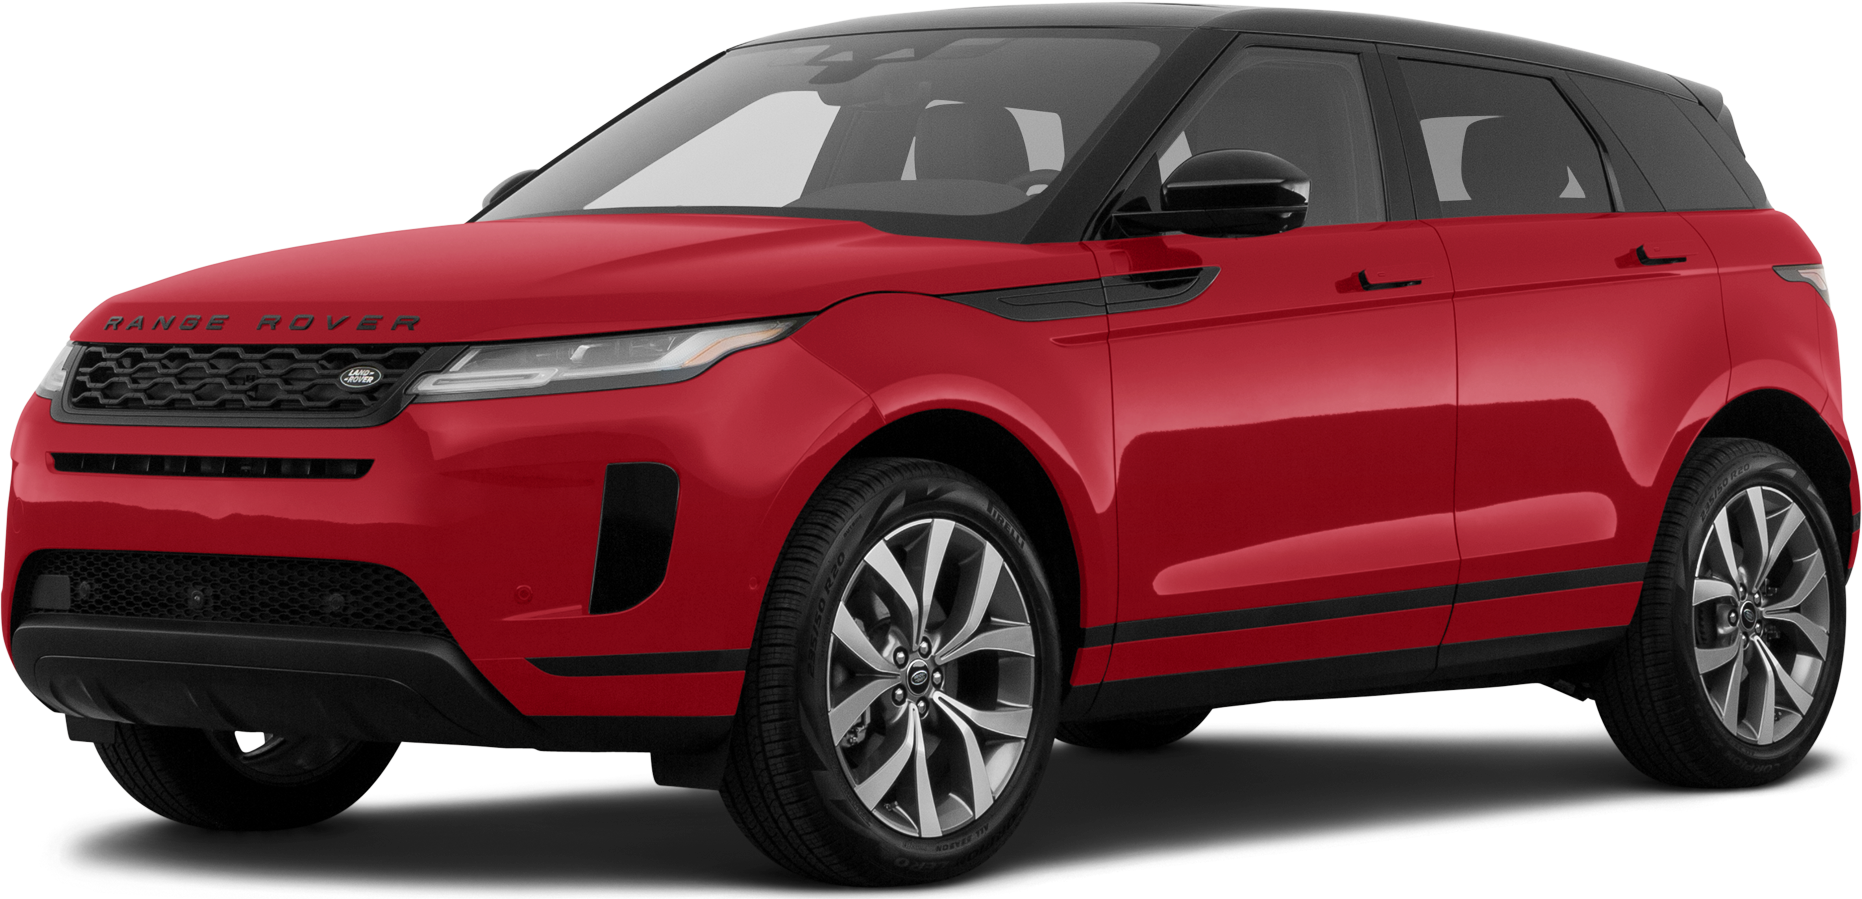 2022 Land Rover Range Rover Evoque Price, Value, Ratings & Reviews